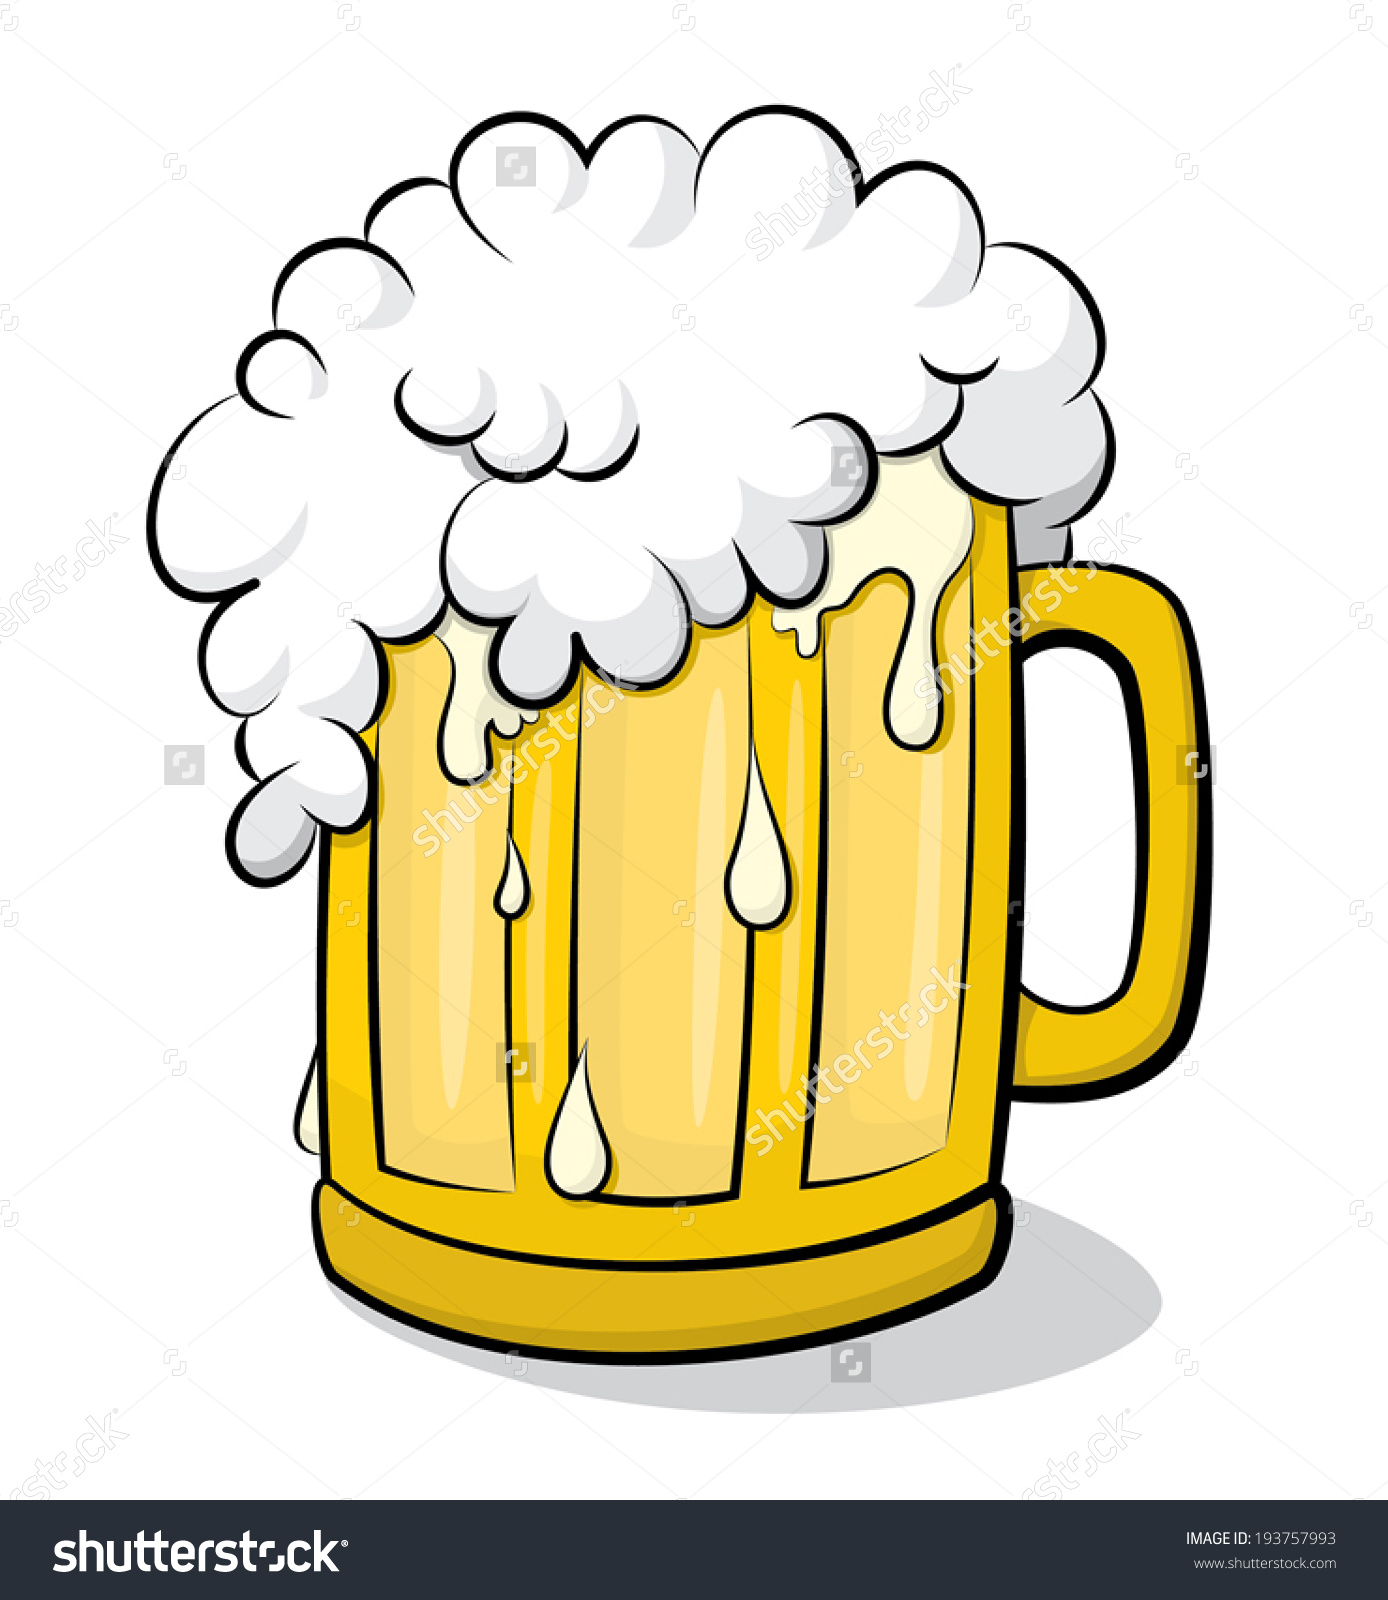 Clipart beer glass - ClipartFest